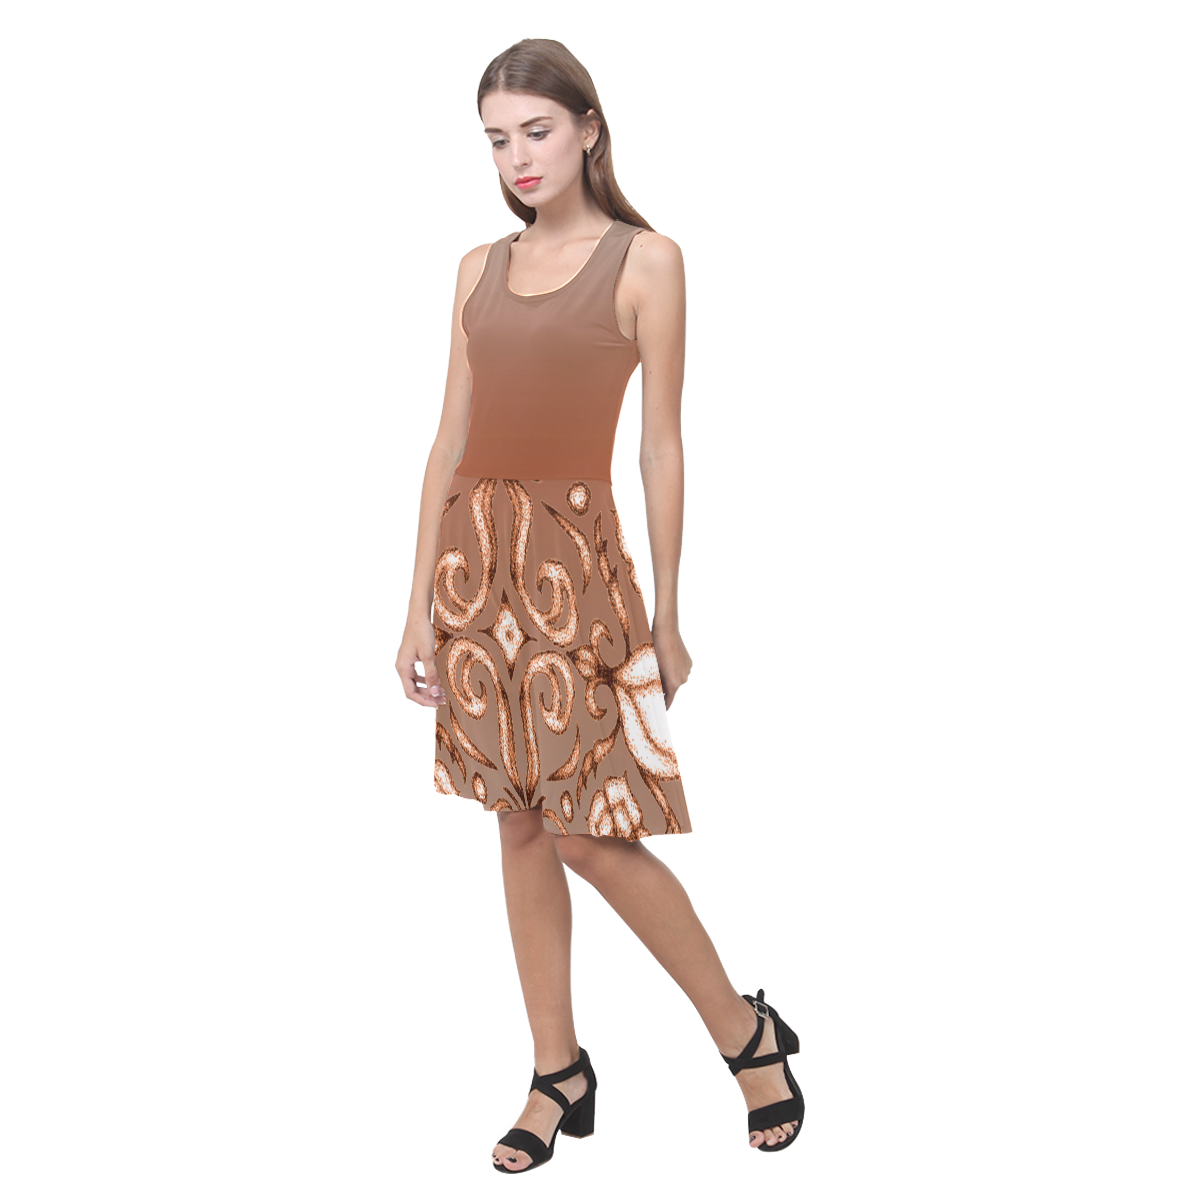 Stained-Glass Quatrafoil in Potter's Clay by Aleta Atalanta Casual Sundress(Model D04)